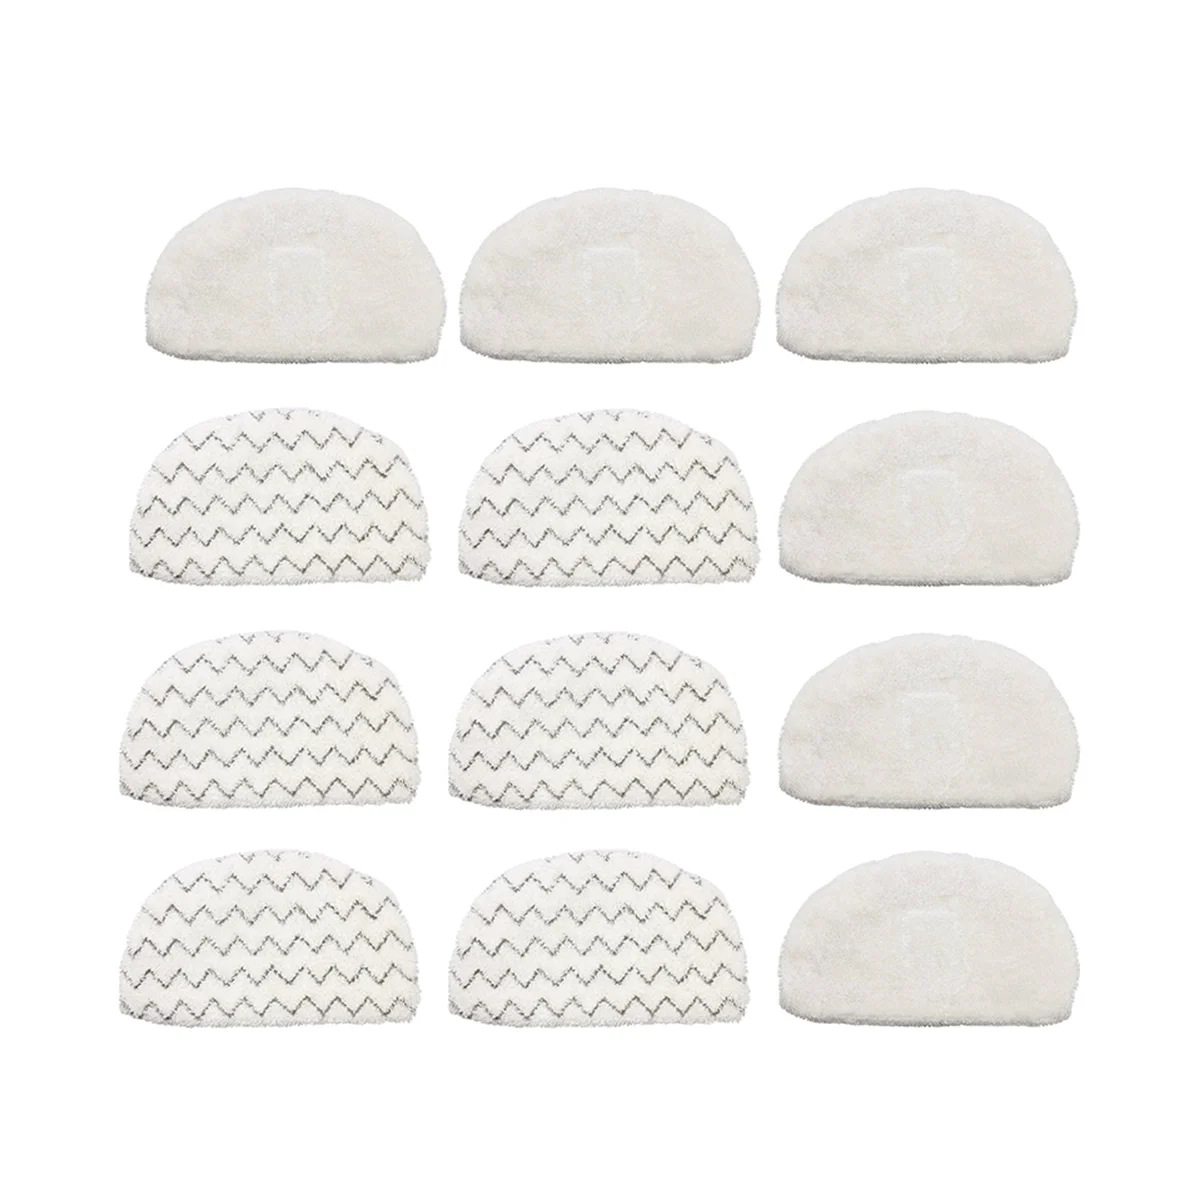 

12PCS Replacement Washable Steam Mop Pads forBissell Powerfresh 1940 1440 Steam Mop Model Cleaning Parts